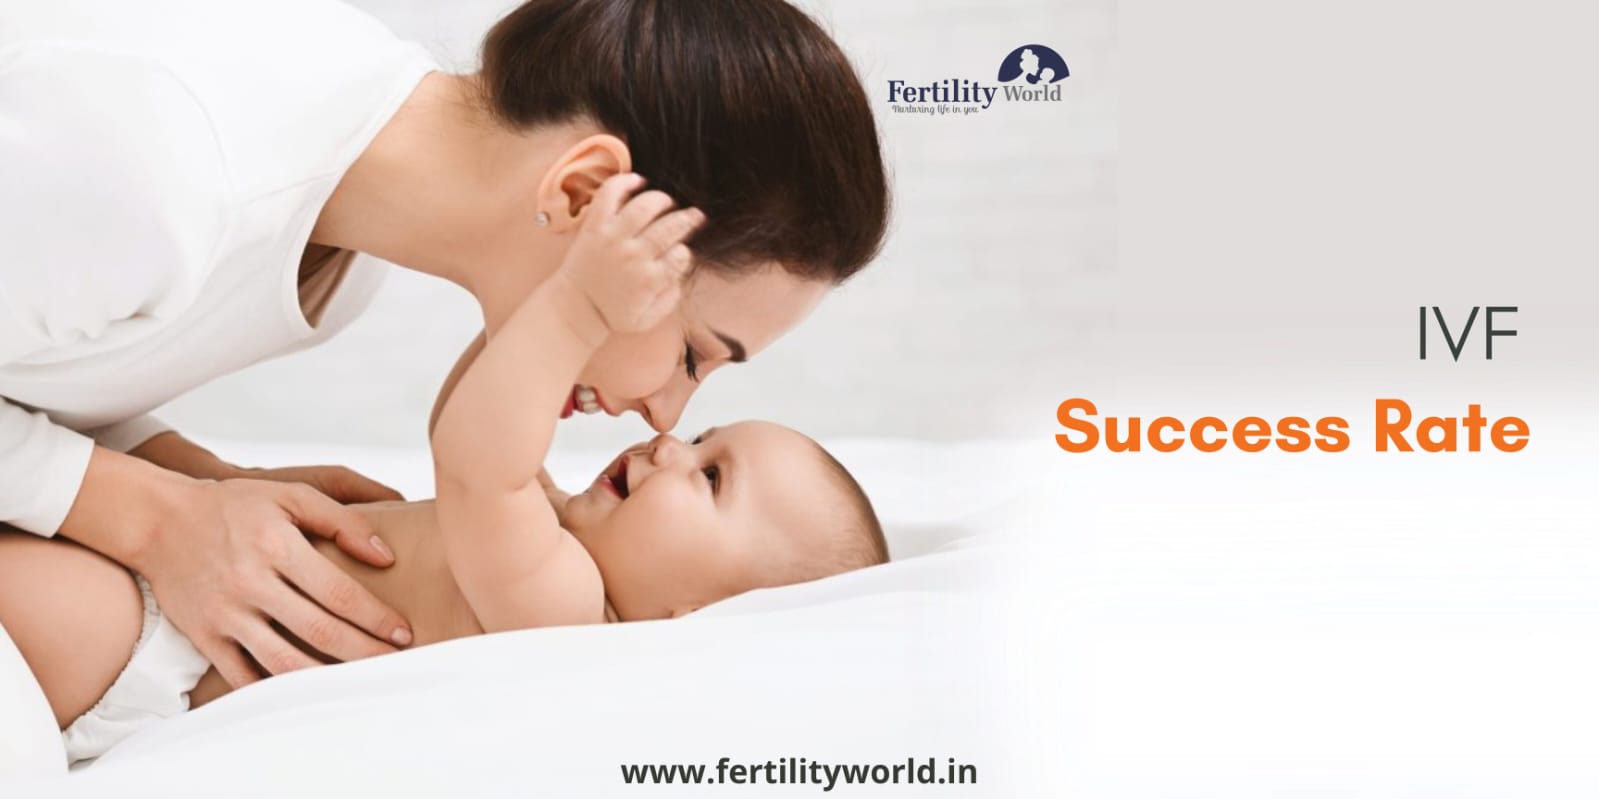 Know more about the IVF success rate in Dubai